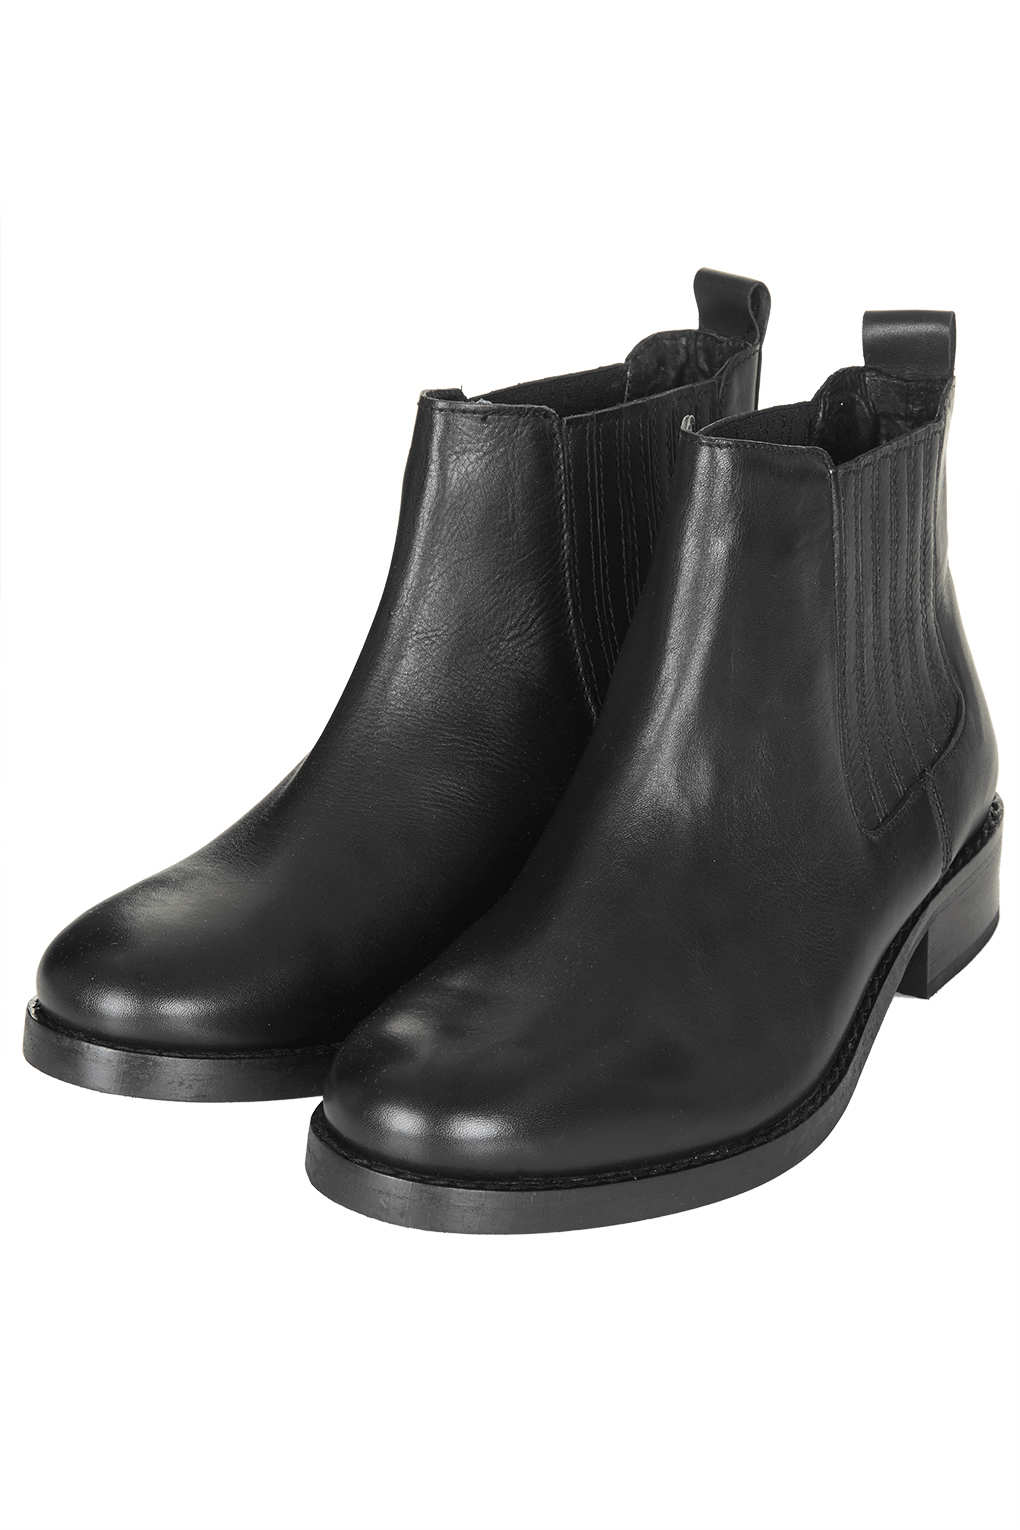 TOPSHOP August Classic Chelsea Boots in Black - Lyst